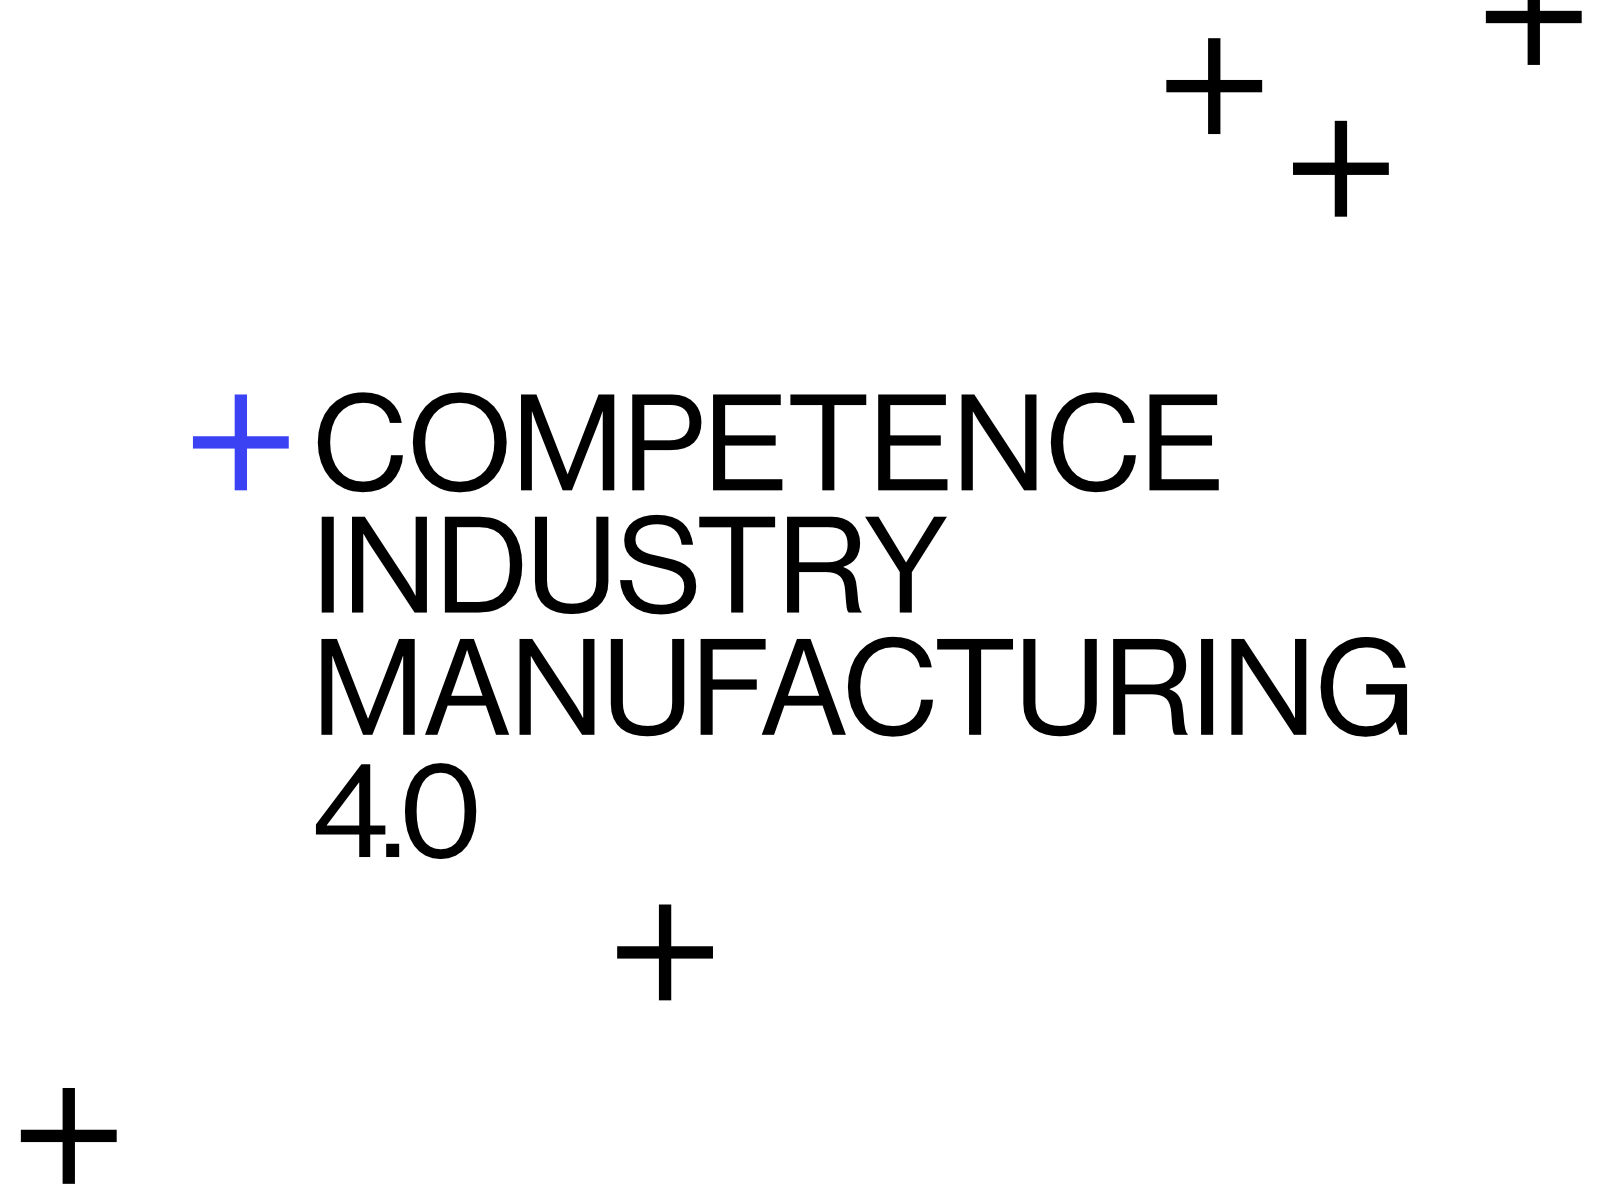 Competence Industry Manufacturing 4.0